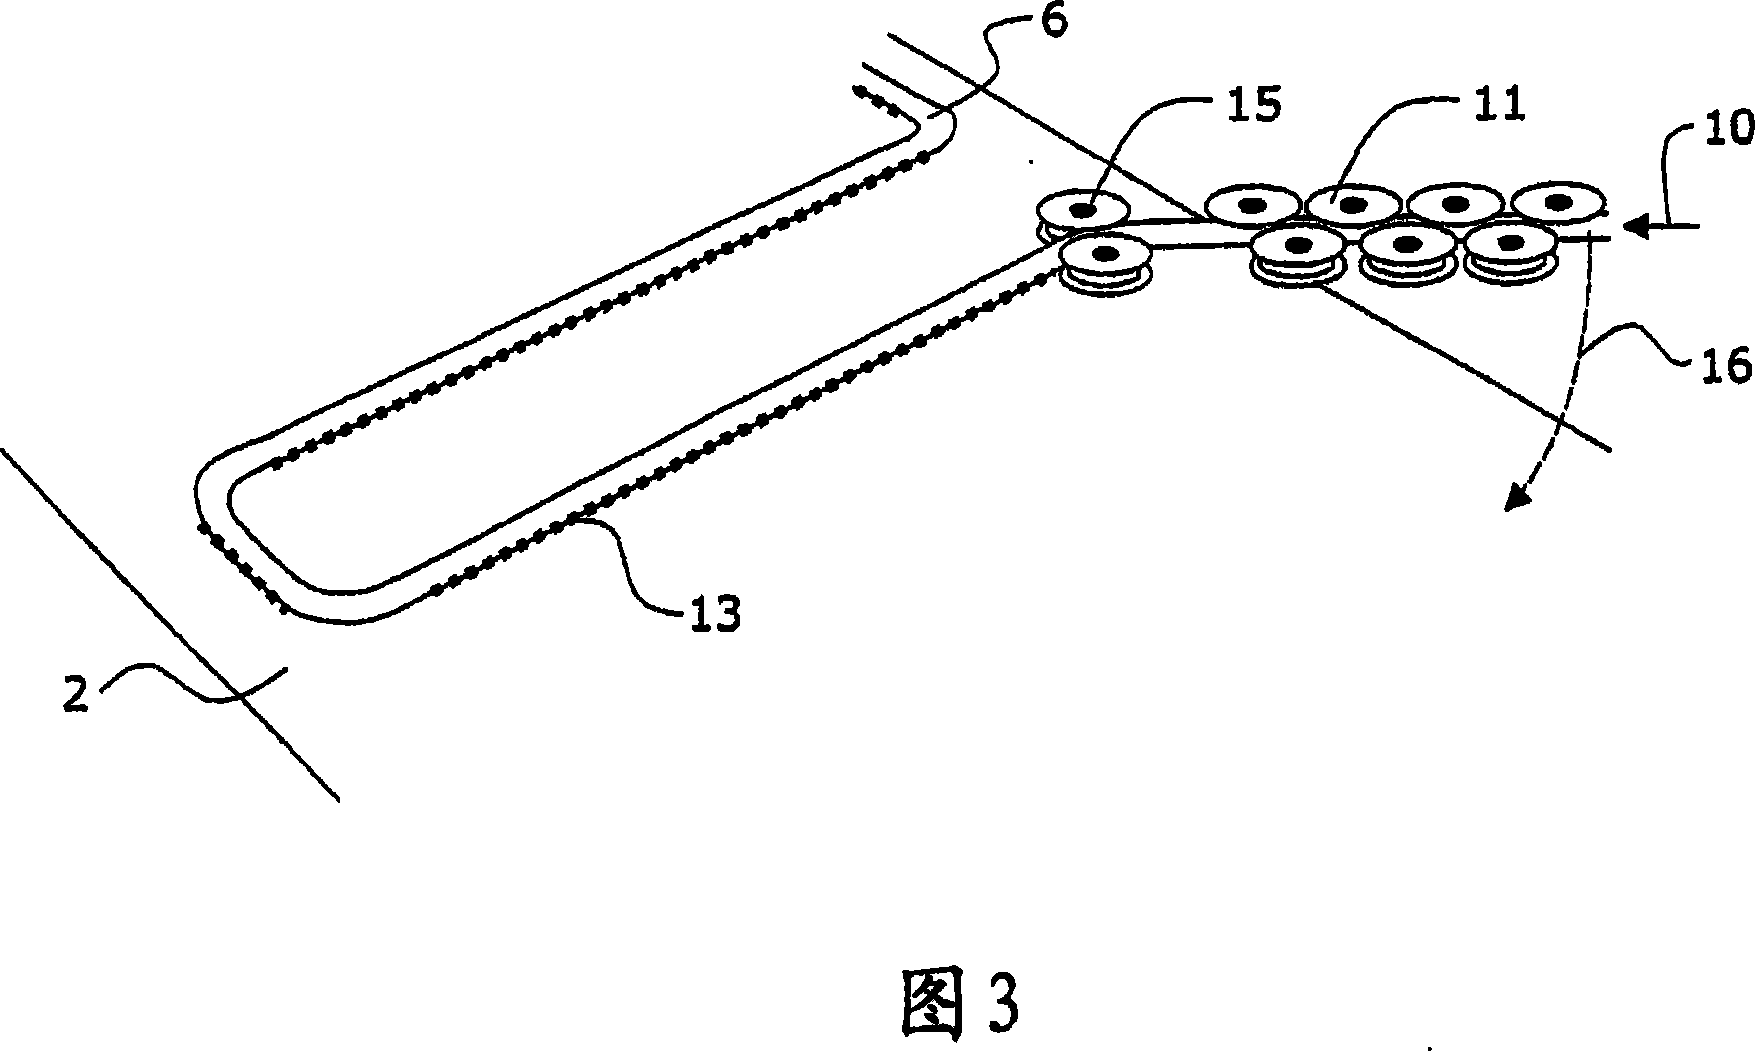 A method for manufacturing a heat-exchanger and a system for performing the method